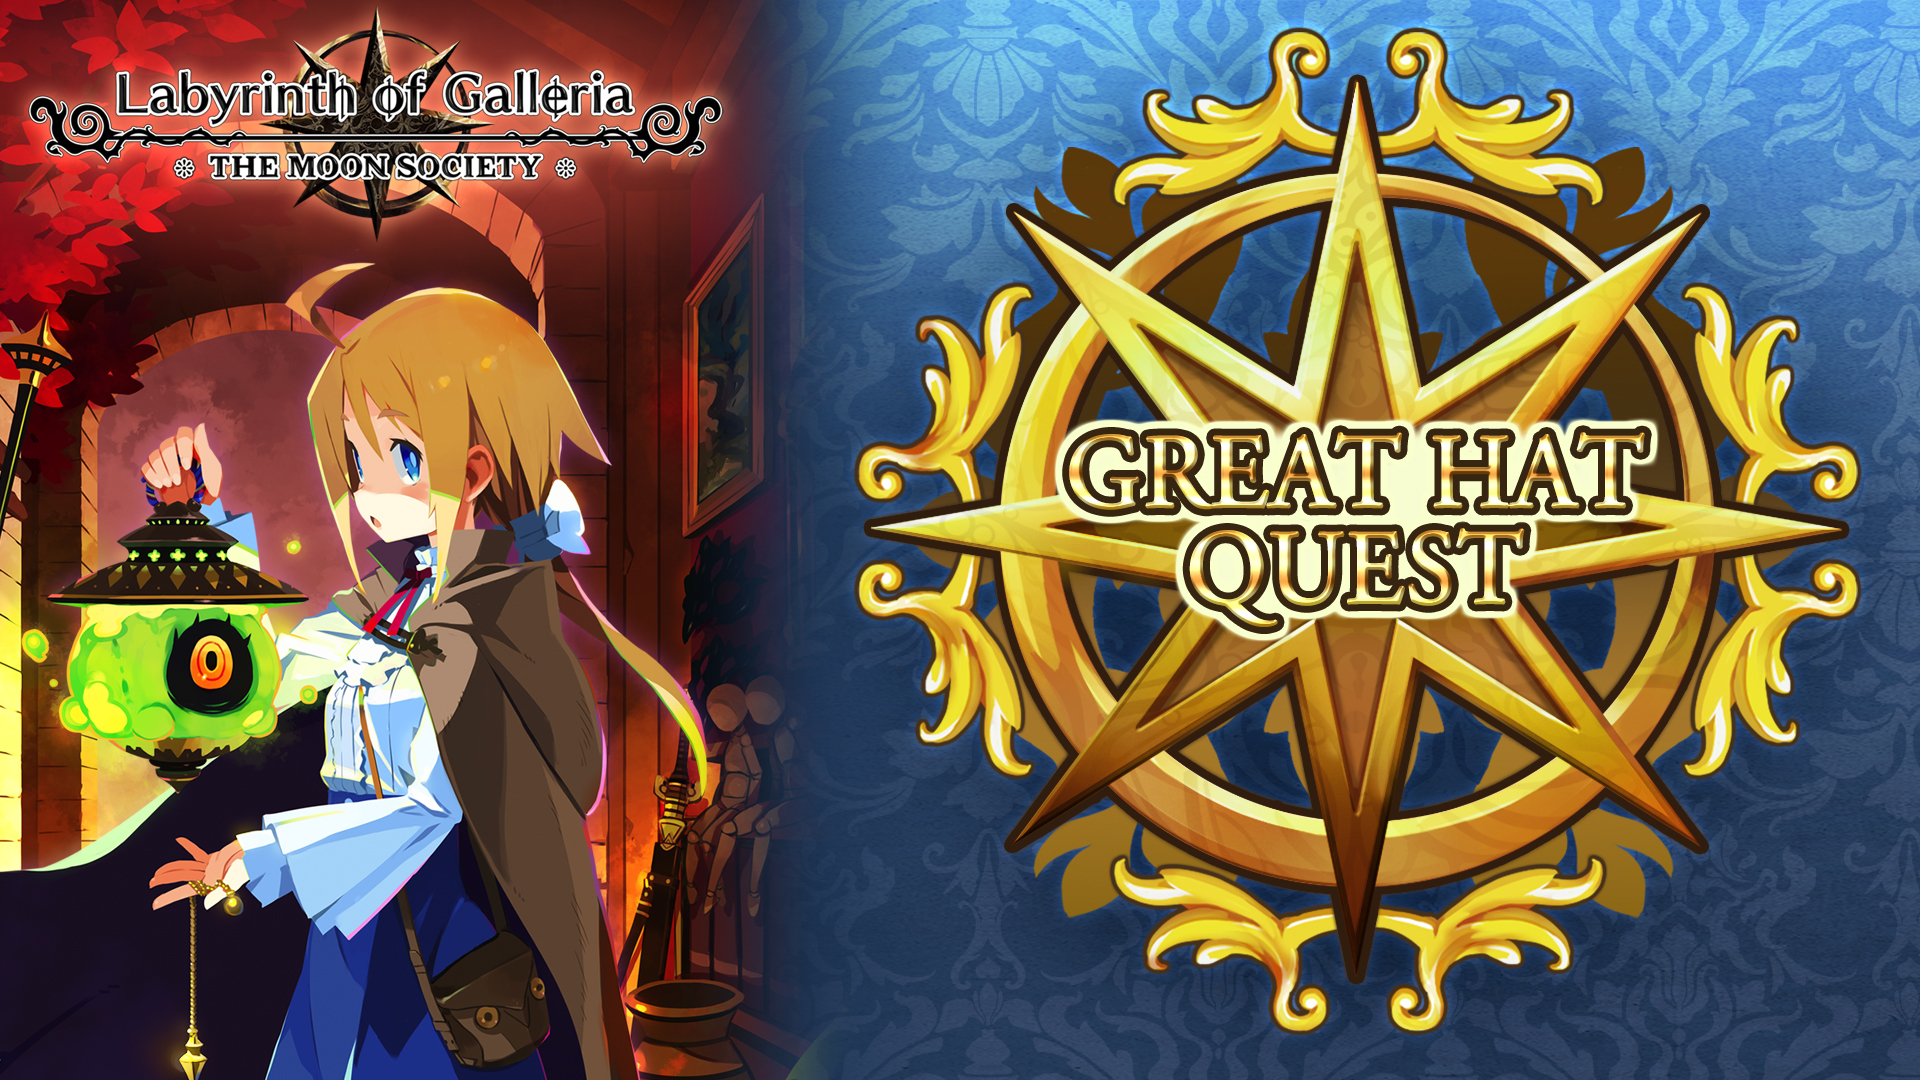 Labyrinth of Galleria: The Moon Society – Great Hat Quest